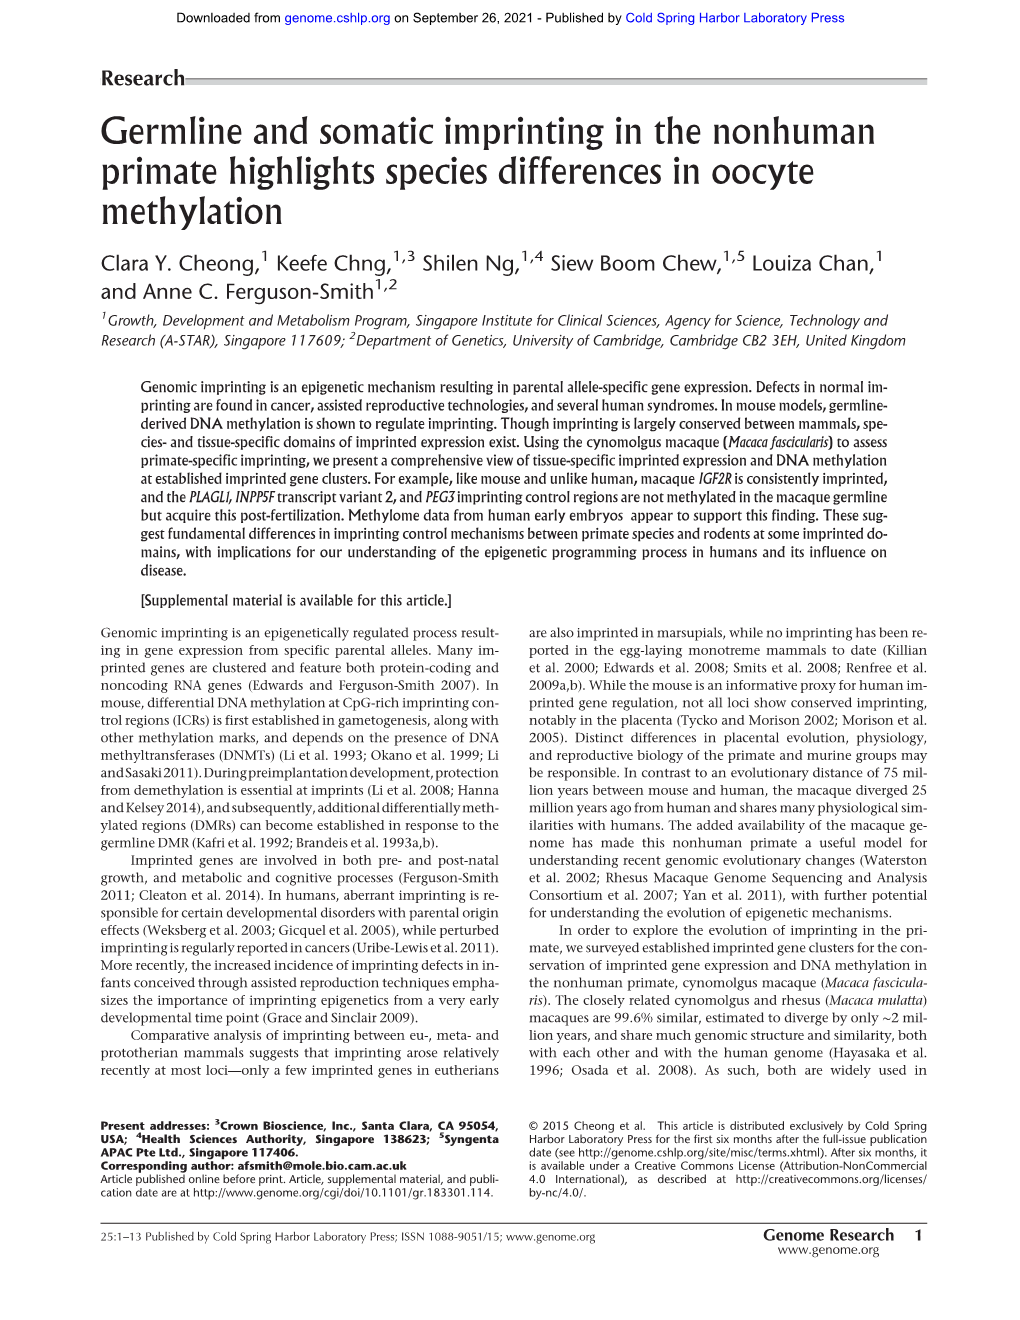 Germline and Somatic Imprinting in the Nonhuman Primate Highlights Species Differences in Oocyte Methylation